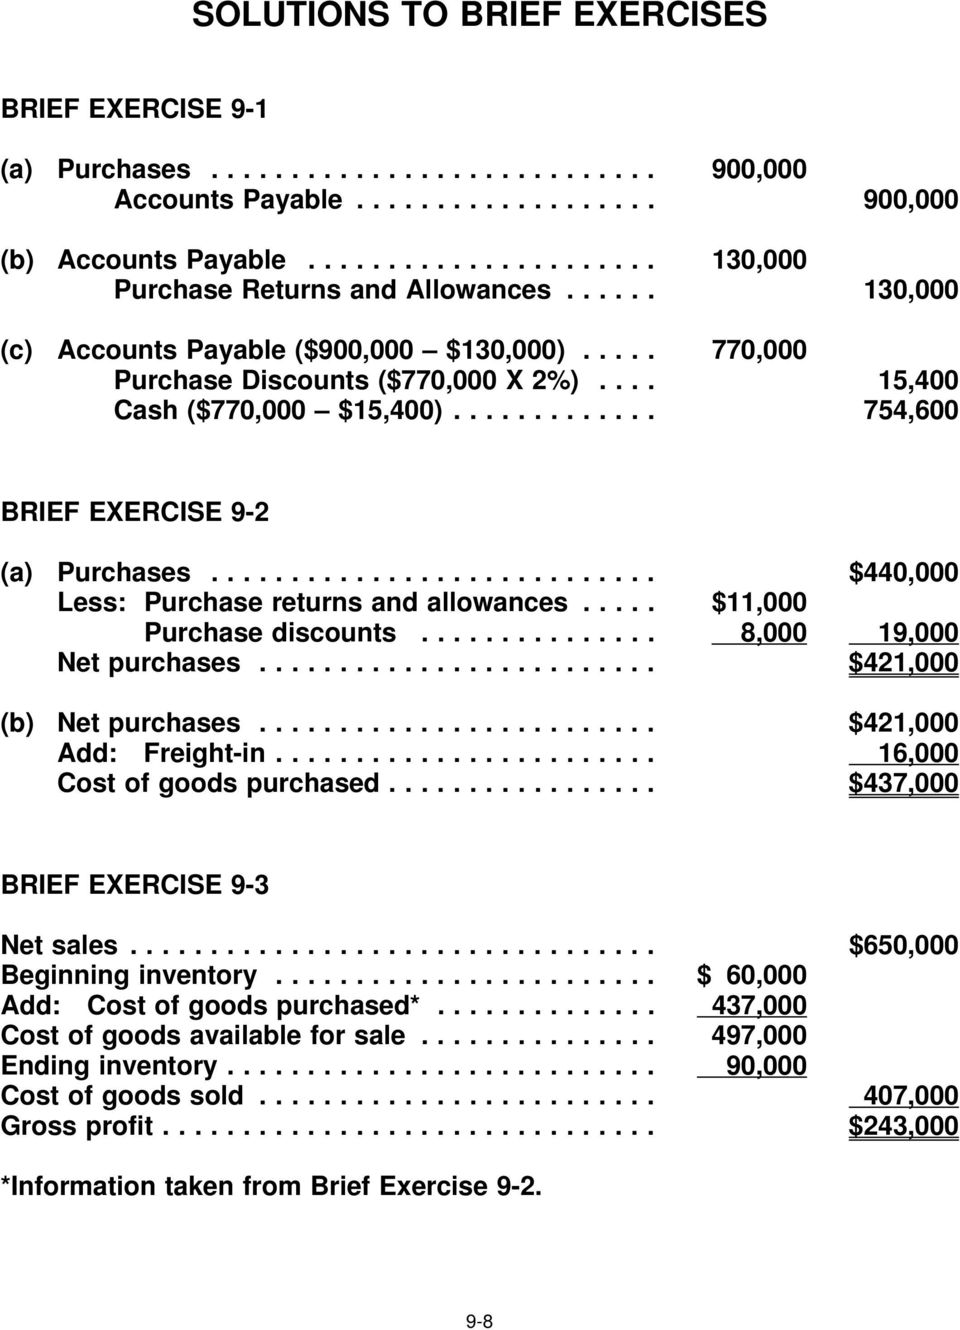 .. $440,000 Less: Purchase returns and allowances... $11,000 Purchase discounts... 008,000 0019,000 Net purchases... $421,000 (b) Net purchases... $421,000 Add: Freight-in.